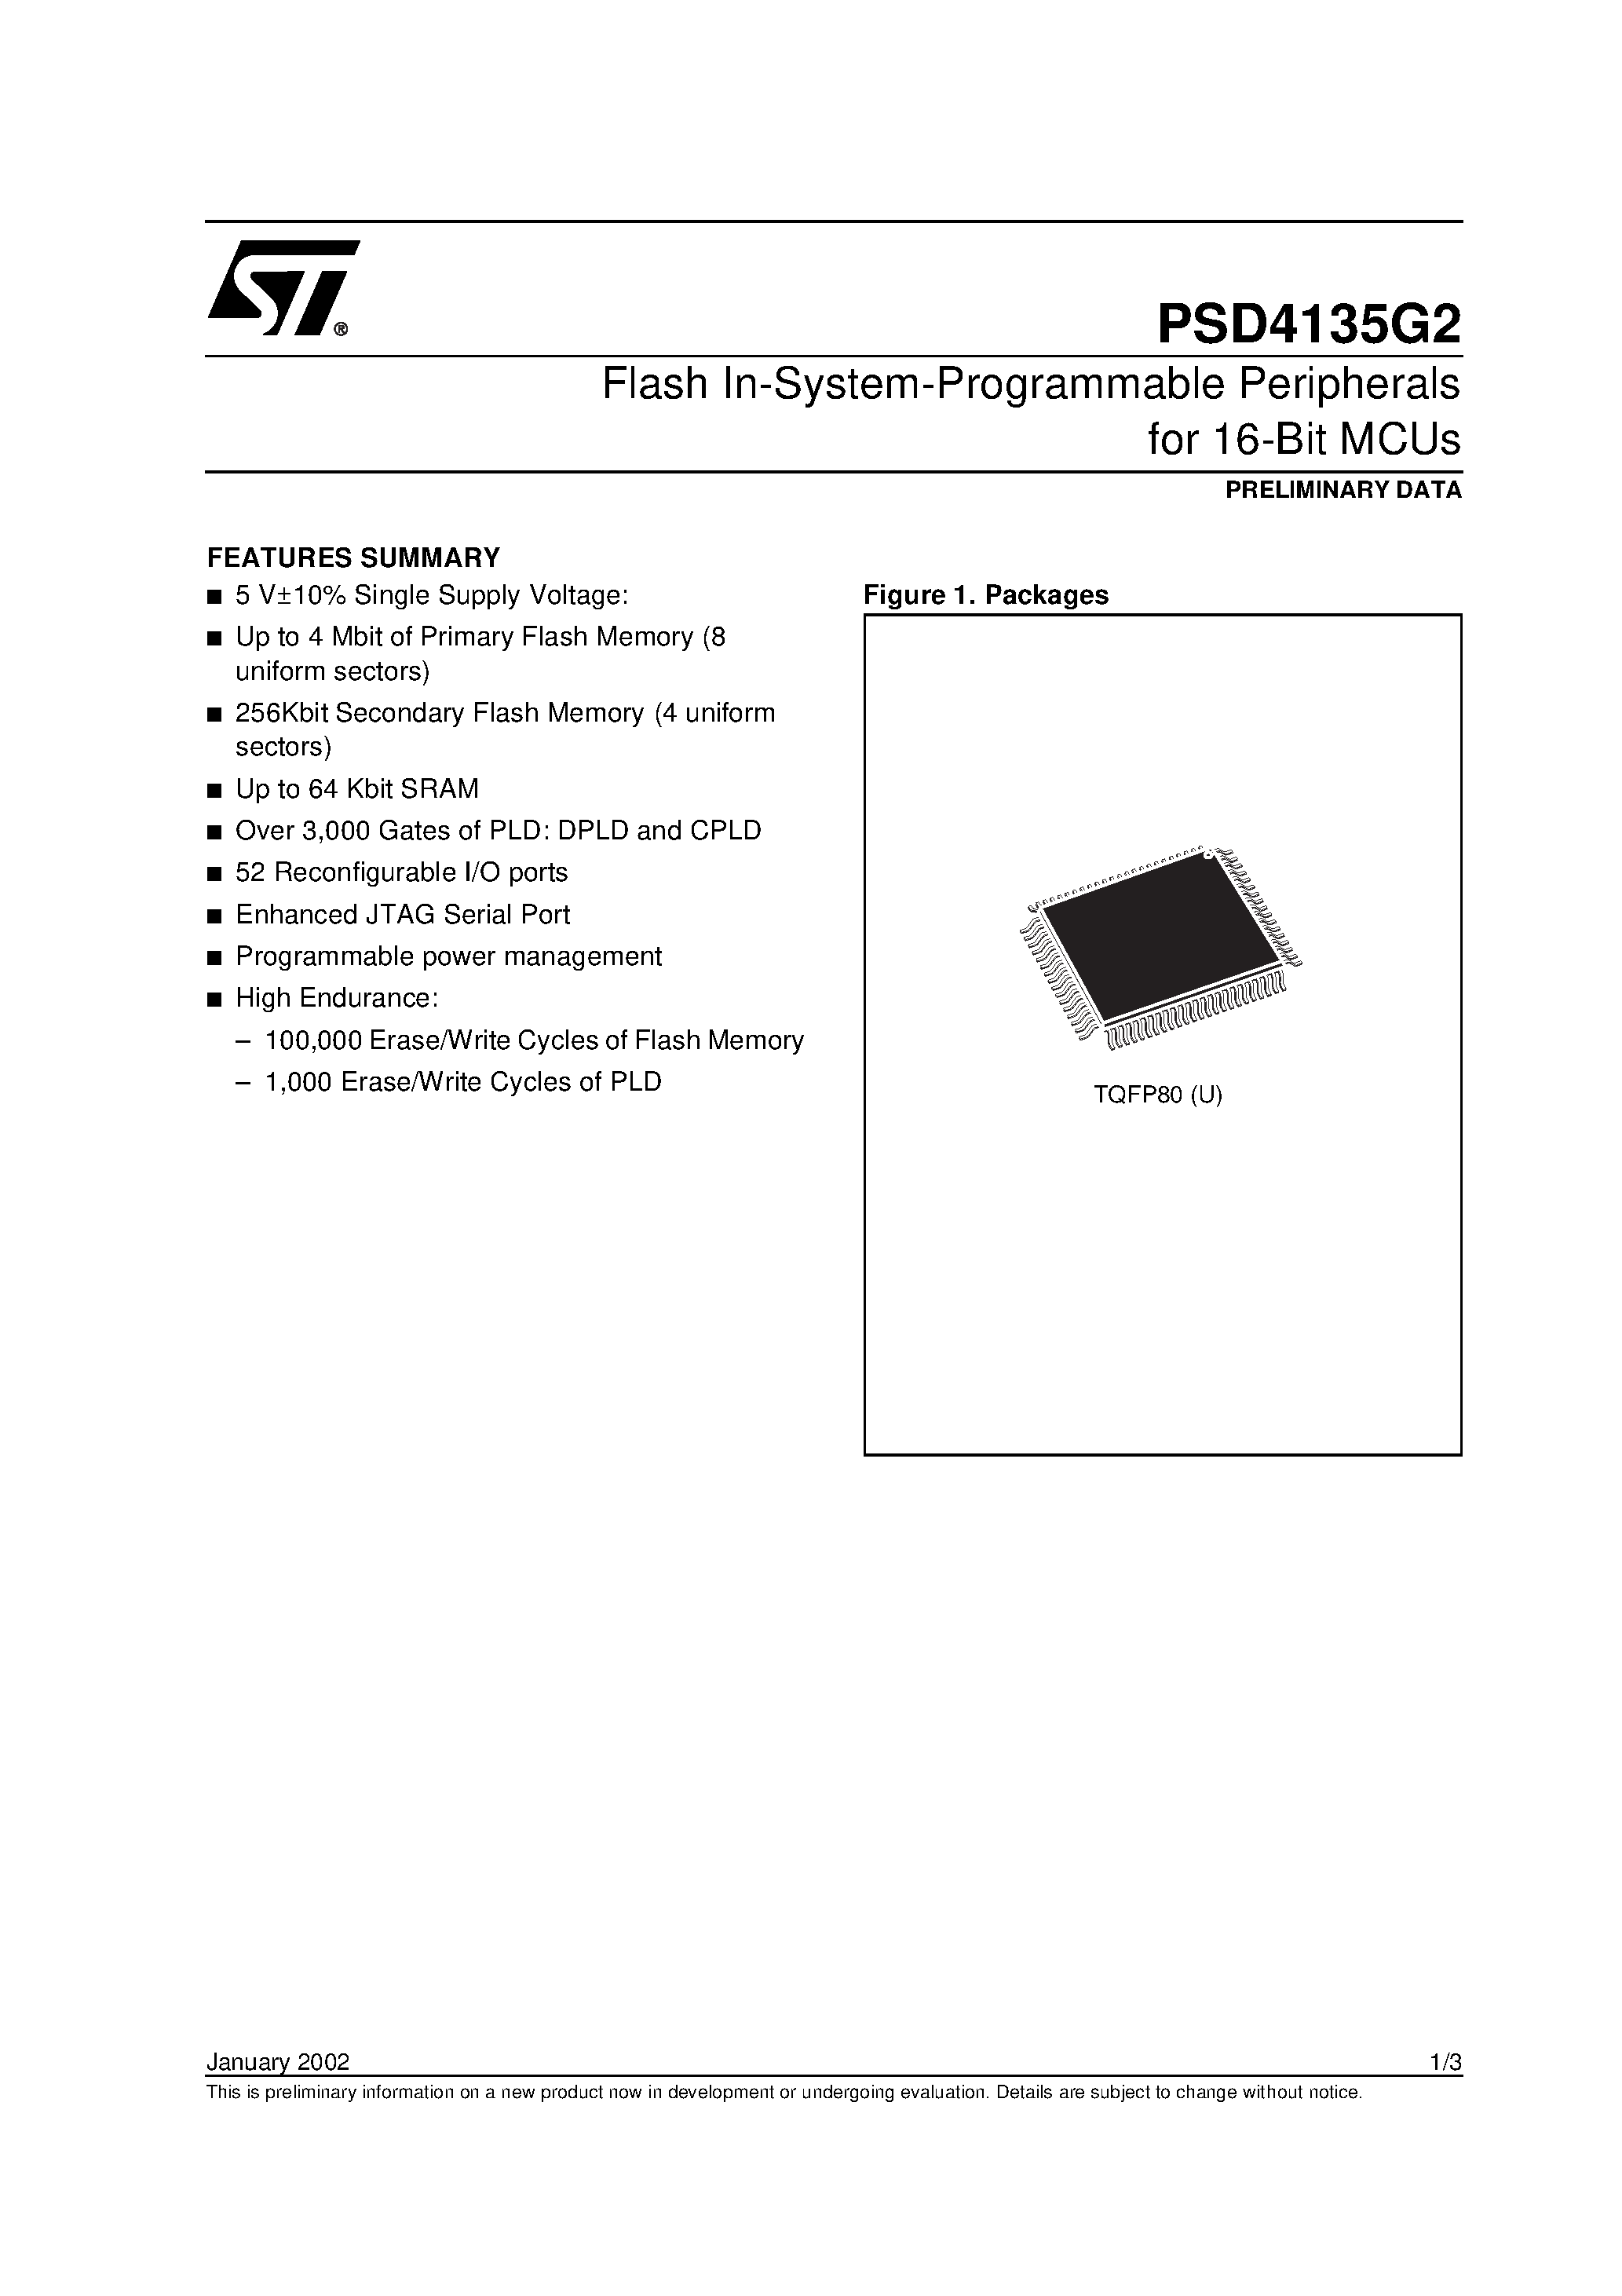 Даташит PSD4135F1-B-12M - Flash In-System-Programmable Peripherals for 16-Bit MCUs страница 1